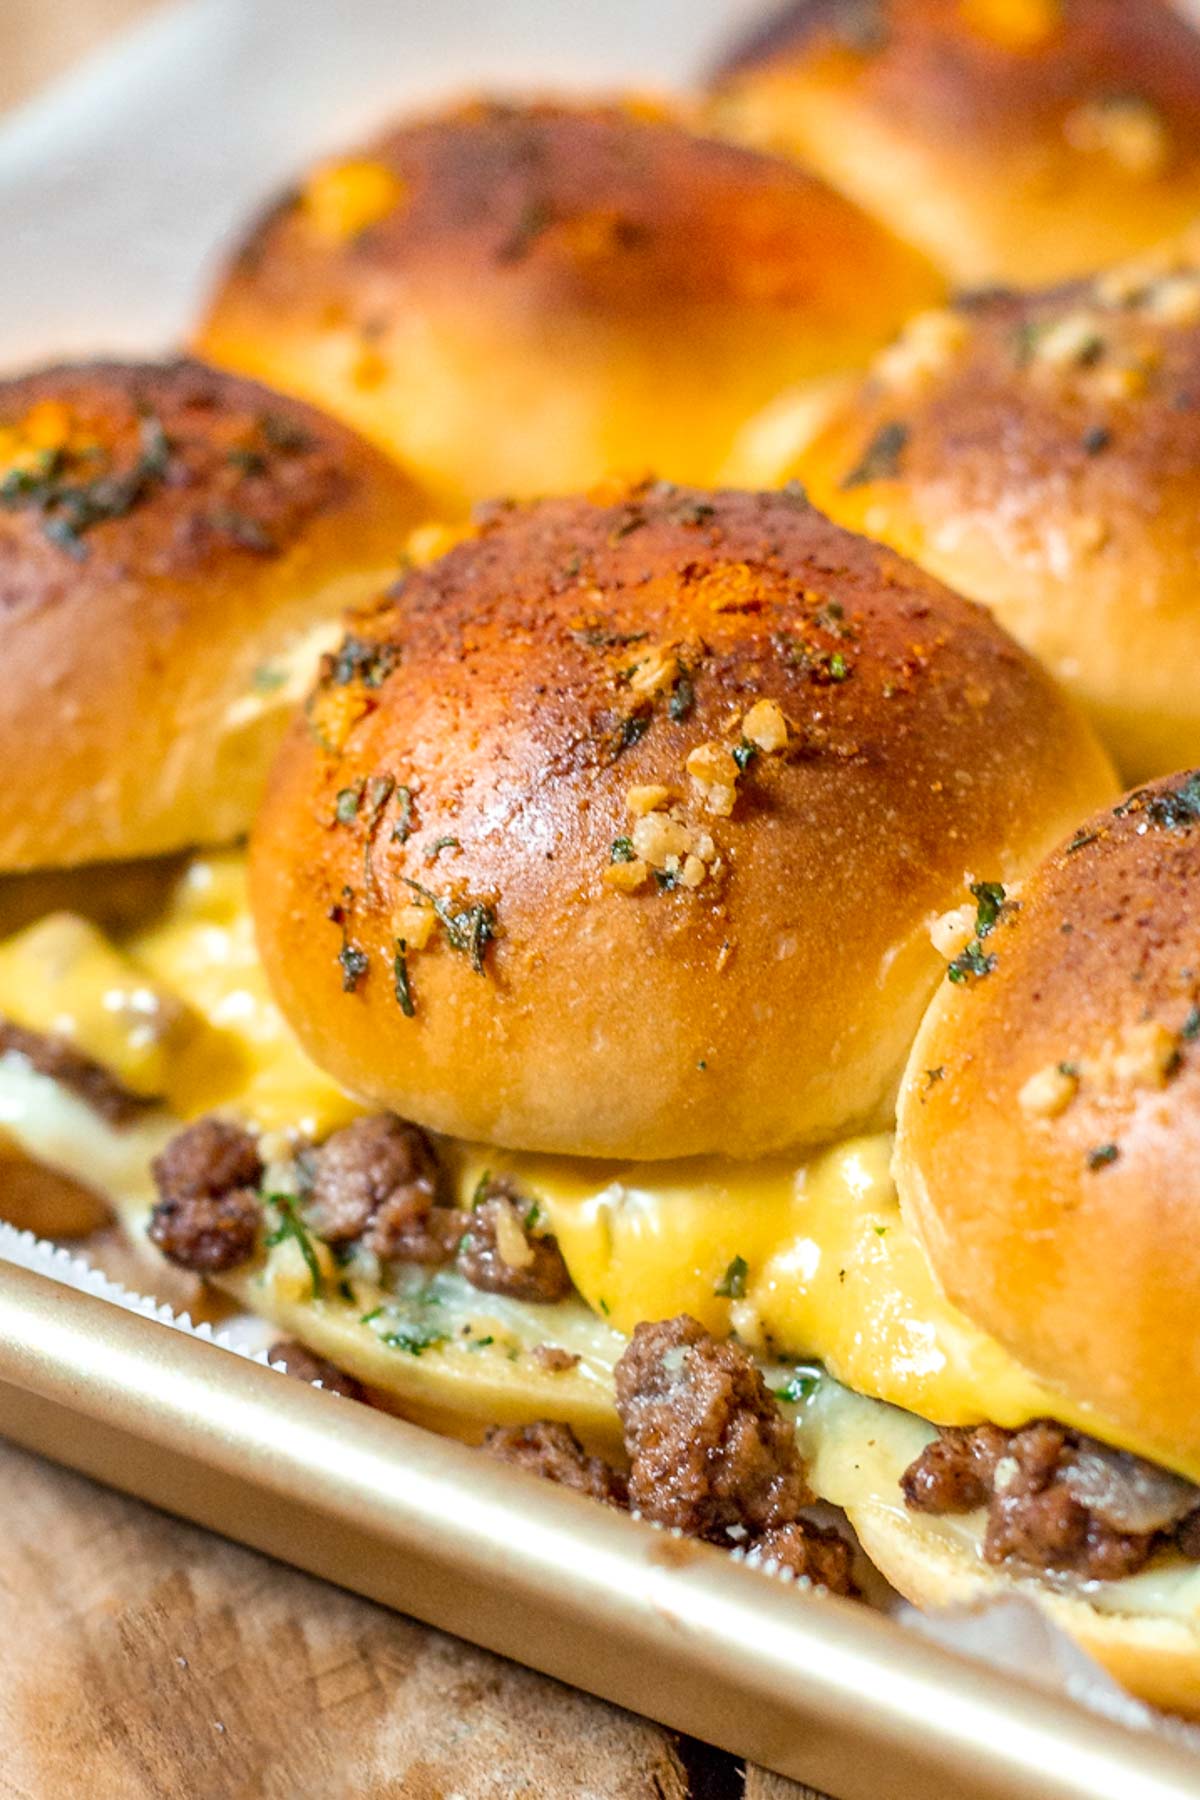 Golden toasted Ground Beef Sliders fresh from the oven.